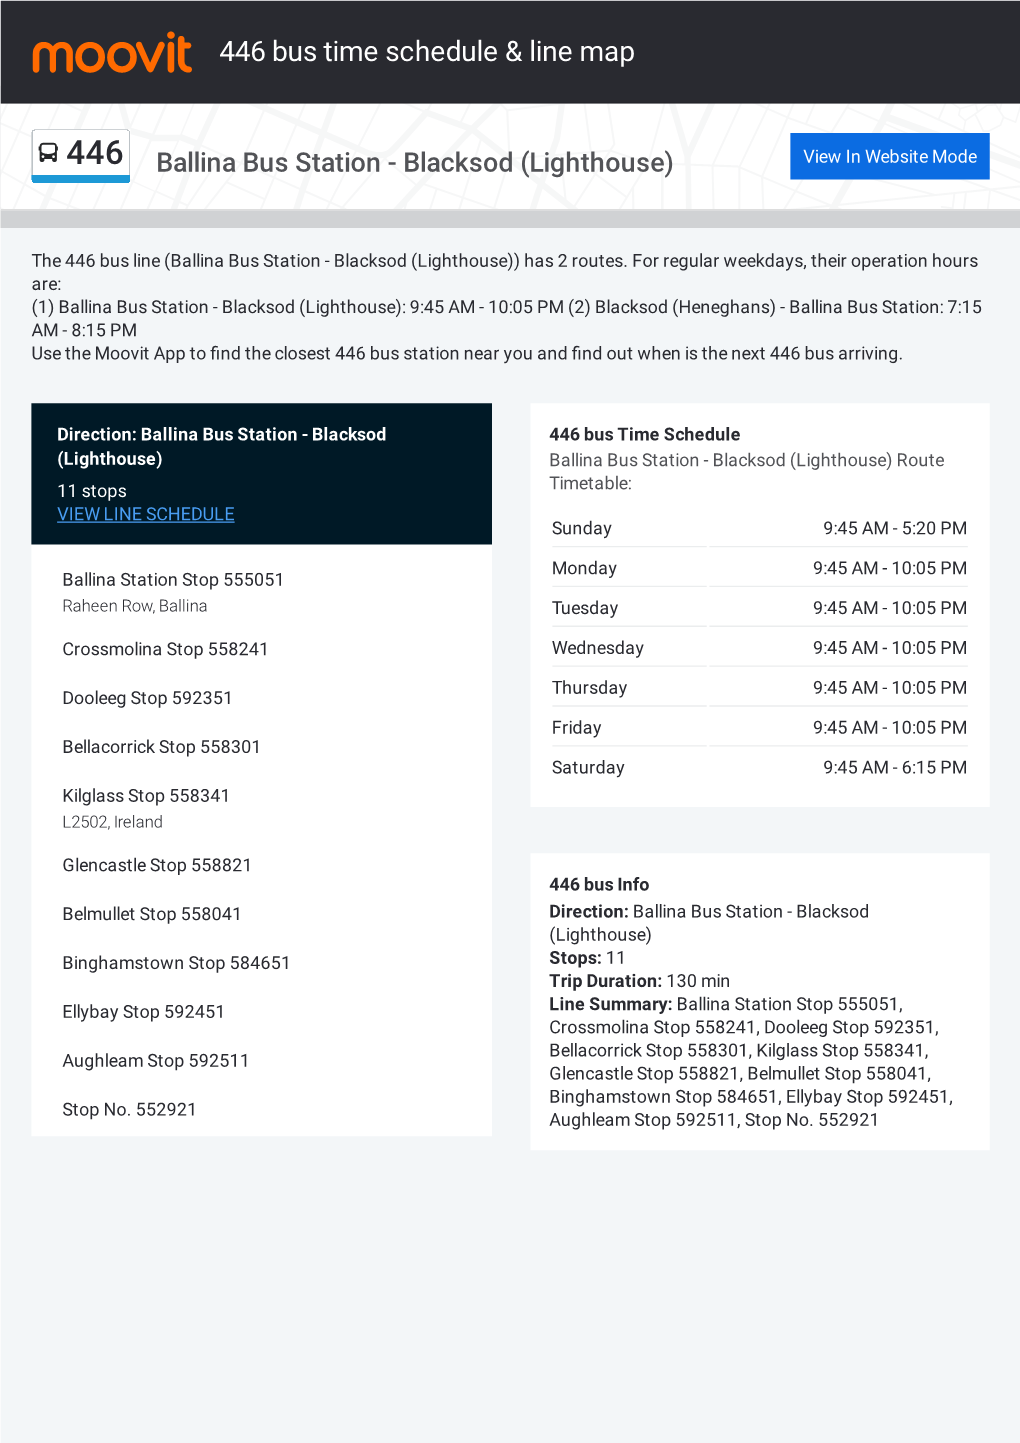 446 Bus Time Schedule & Line Route